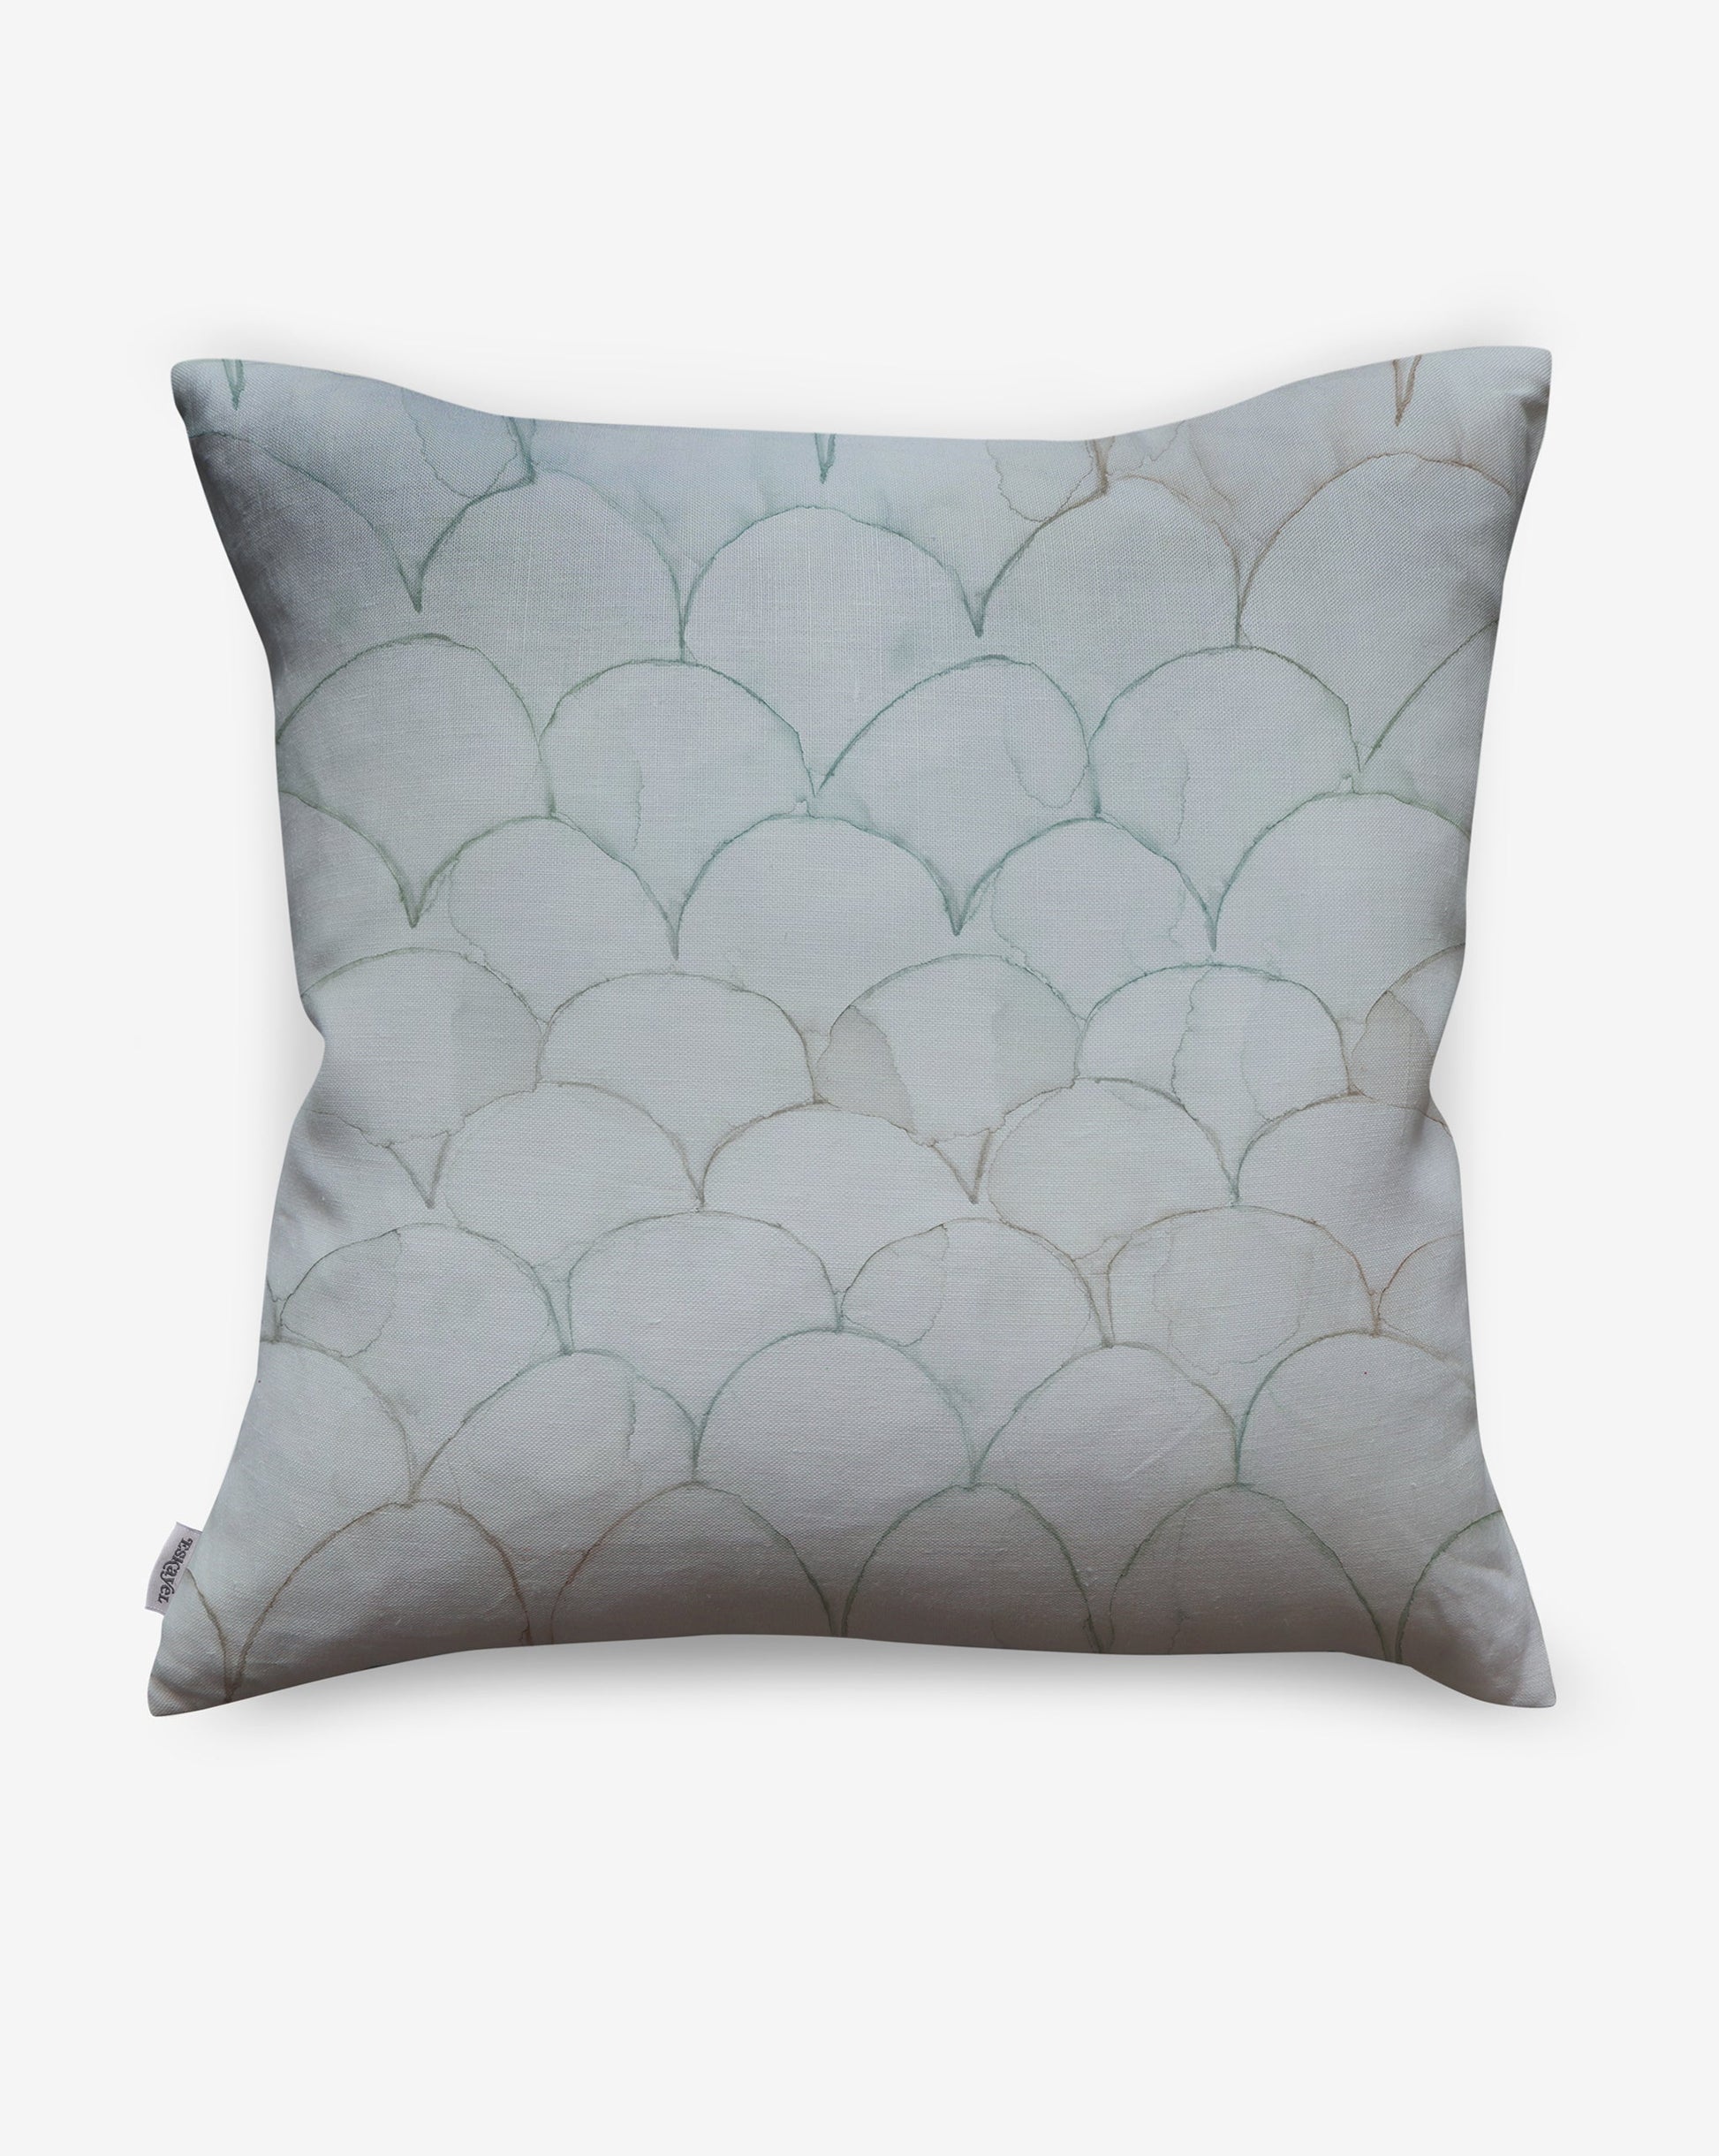 Baby Scallops pillows in Sage present watery teal tones as a geometric pattern of overlapping curves.